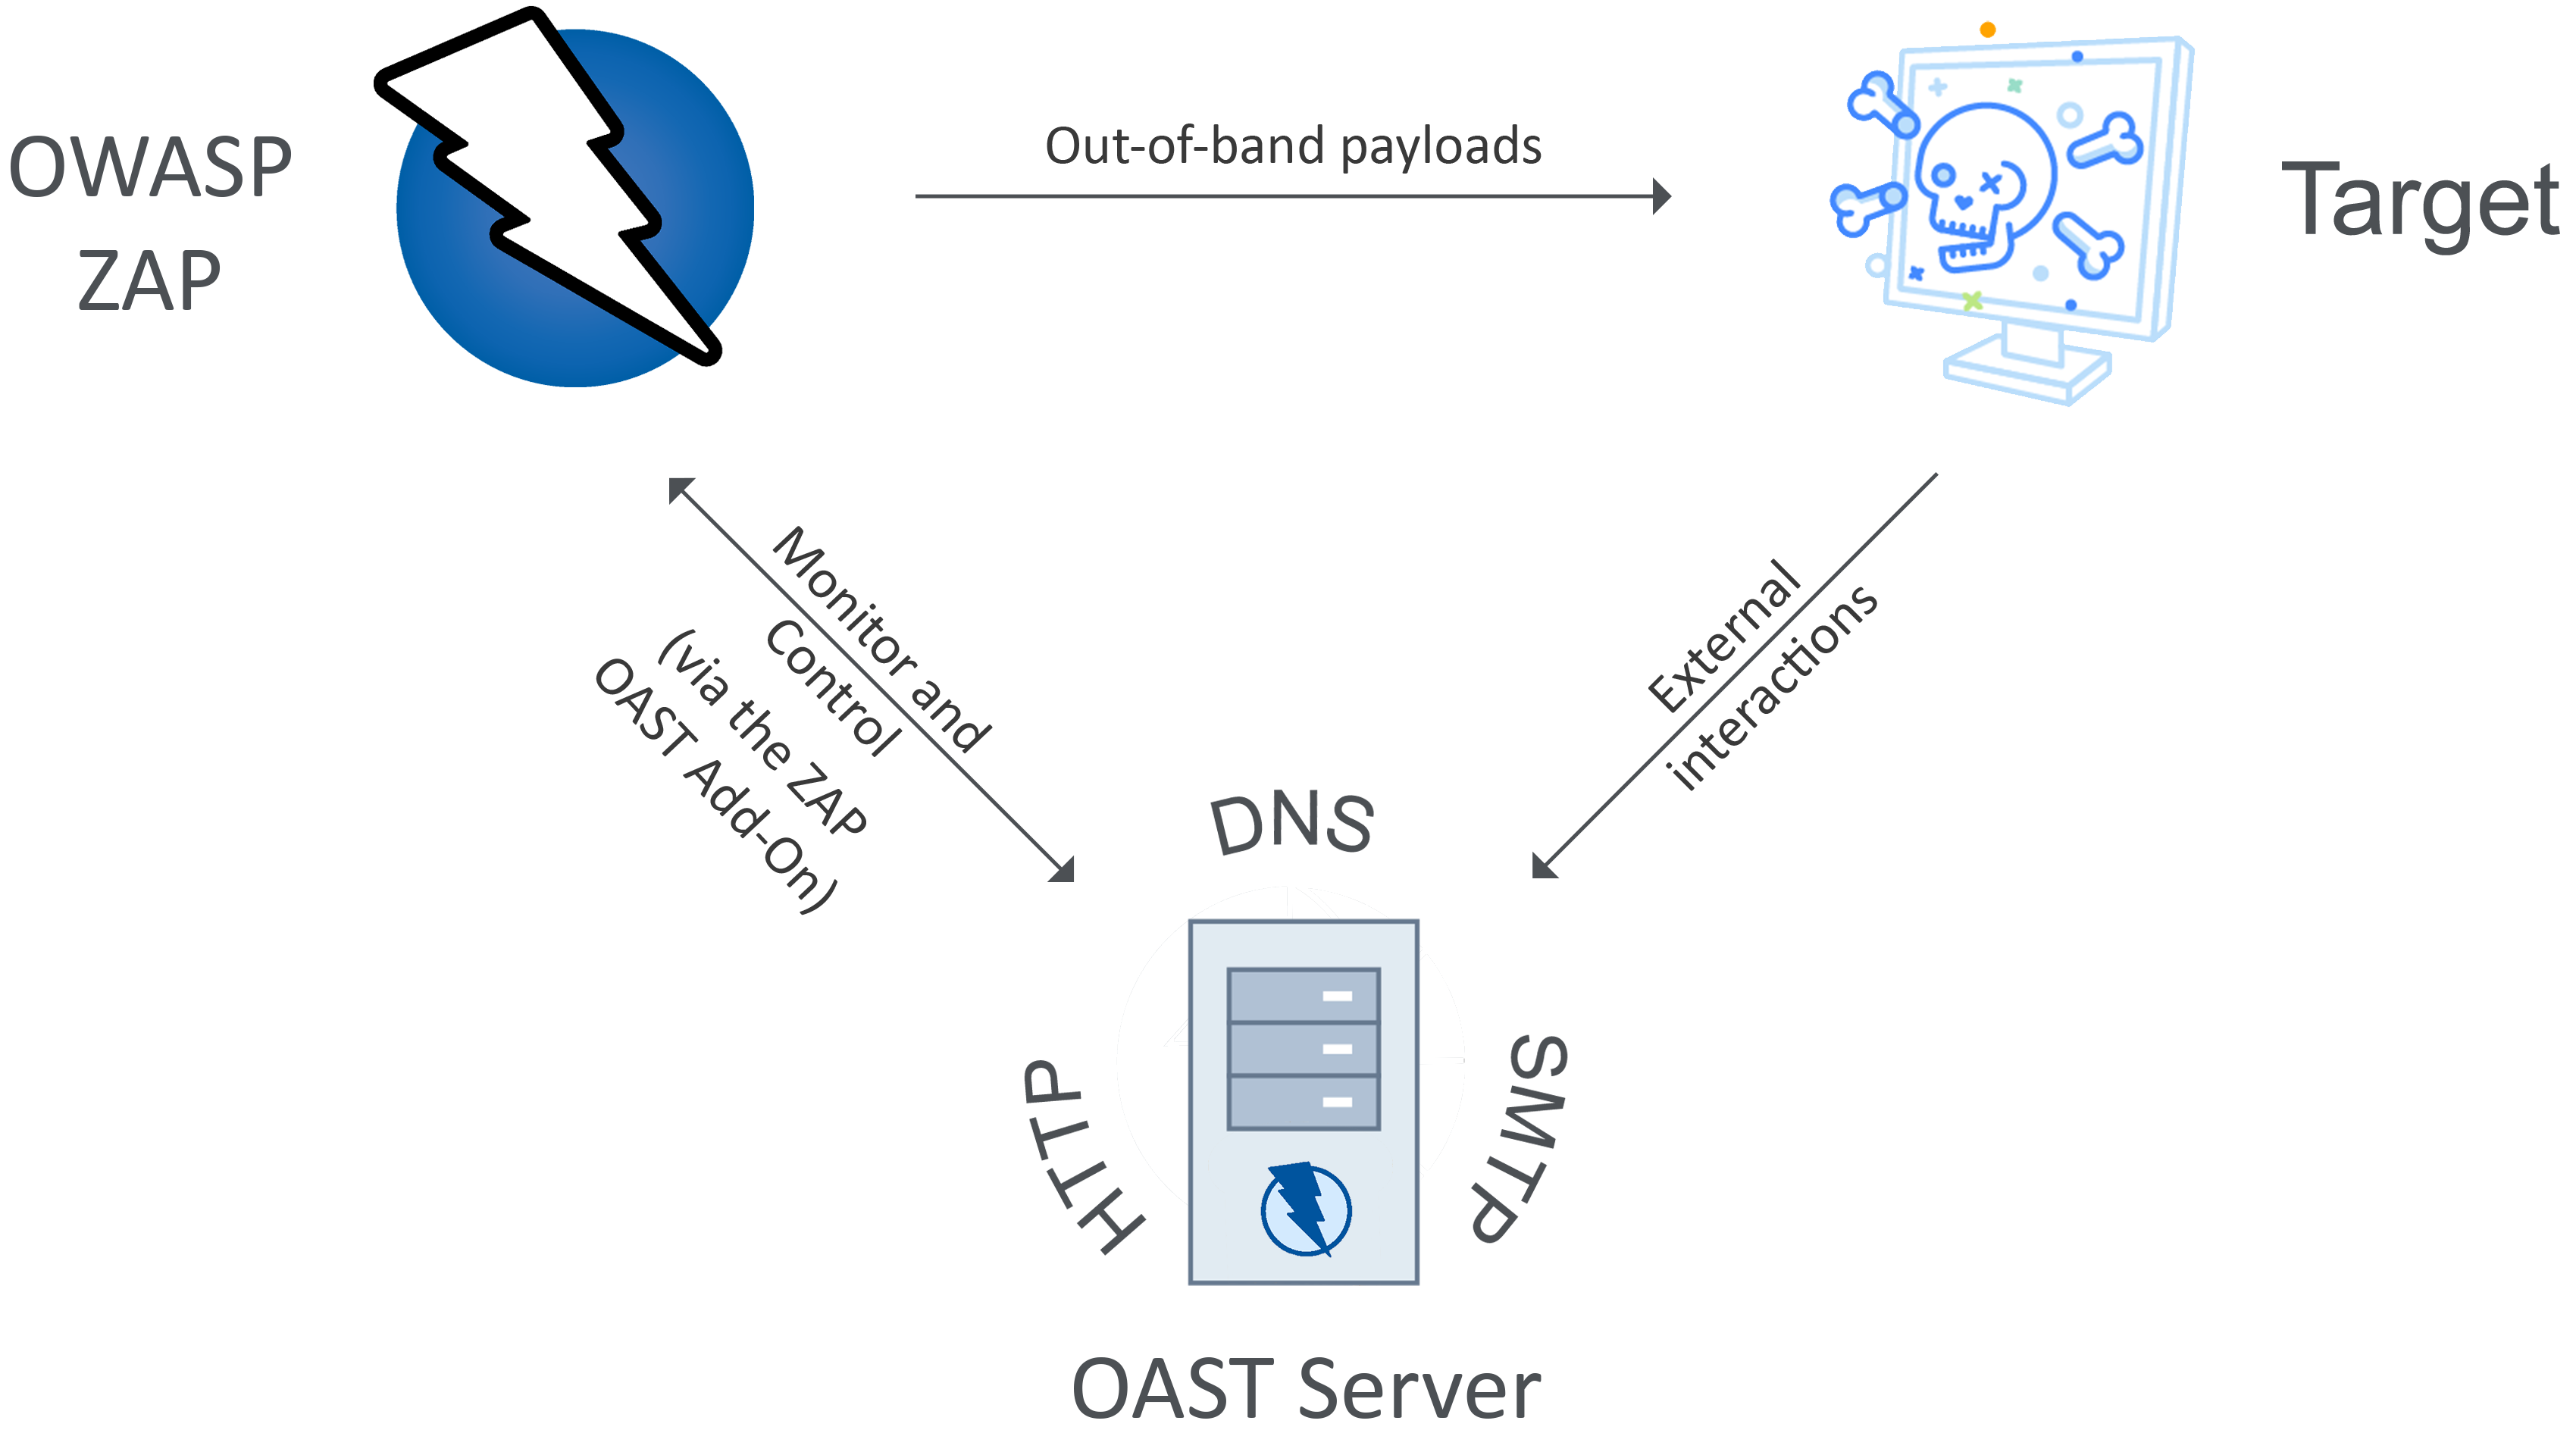 ZAP OAST Graphic that has logos of ZAP, the target and OAST with arrows between them.